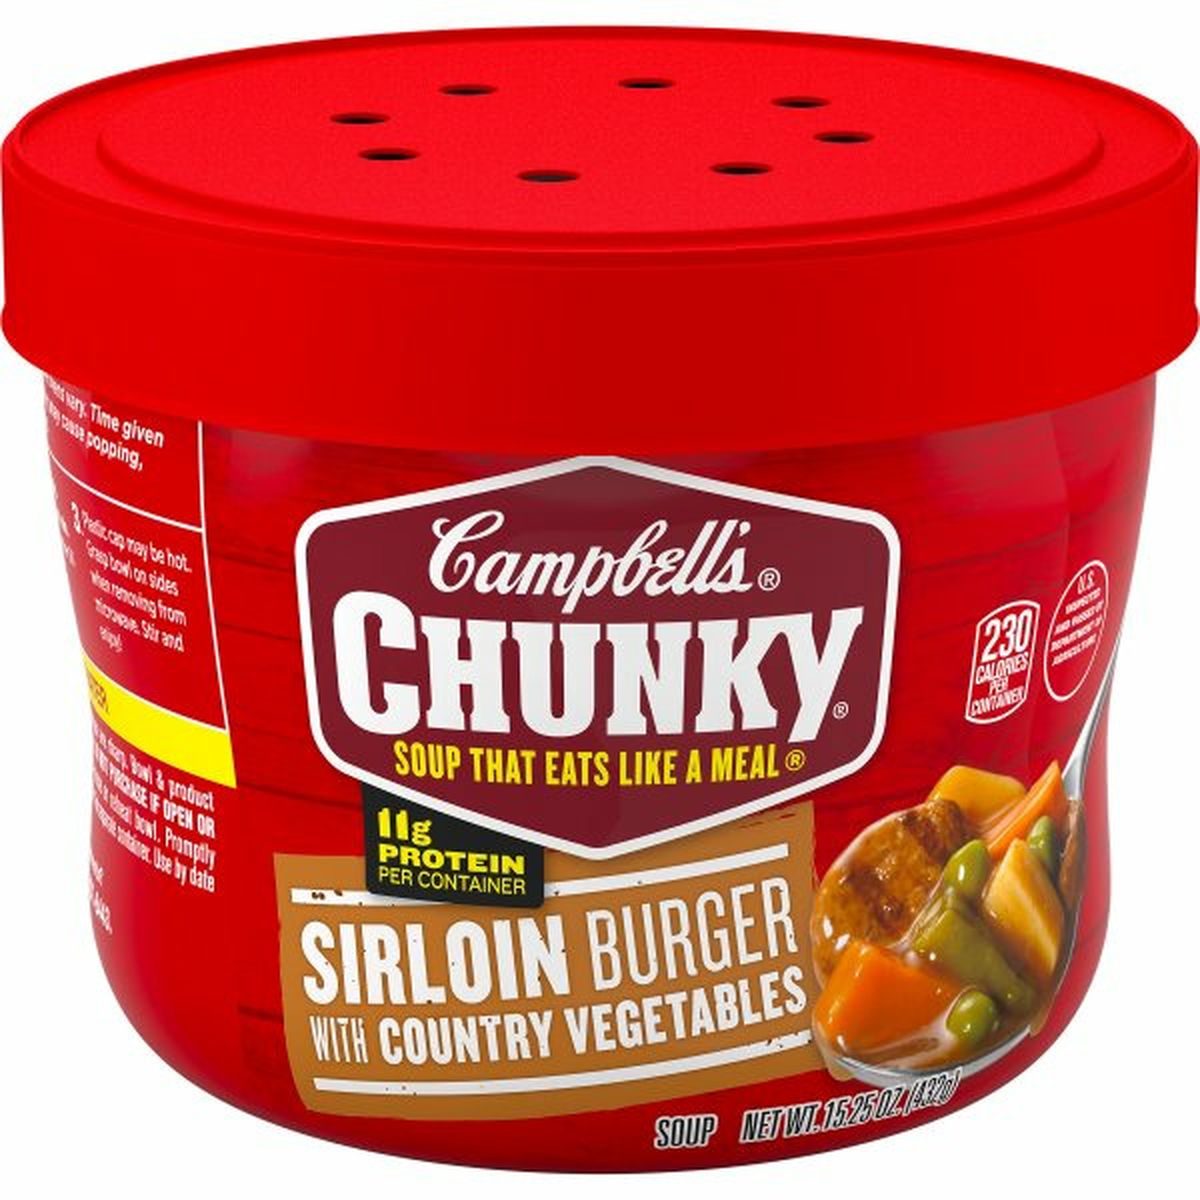 Calories in Campbell'ss Chunkys Chunky Sirloin Burger with Country Vegetables Soup